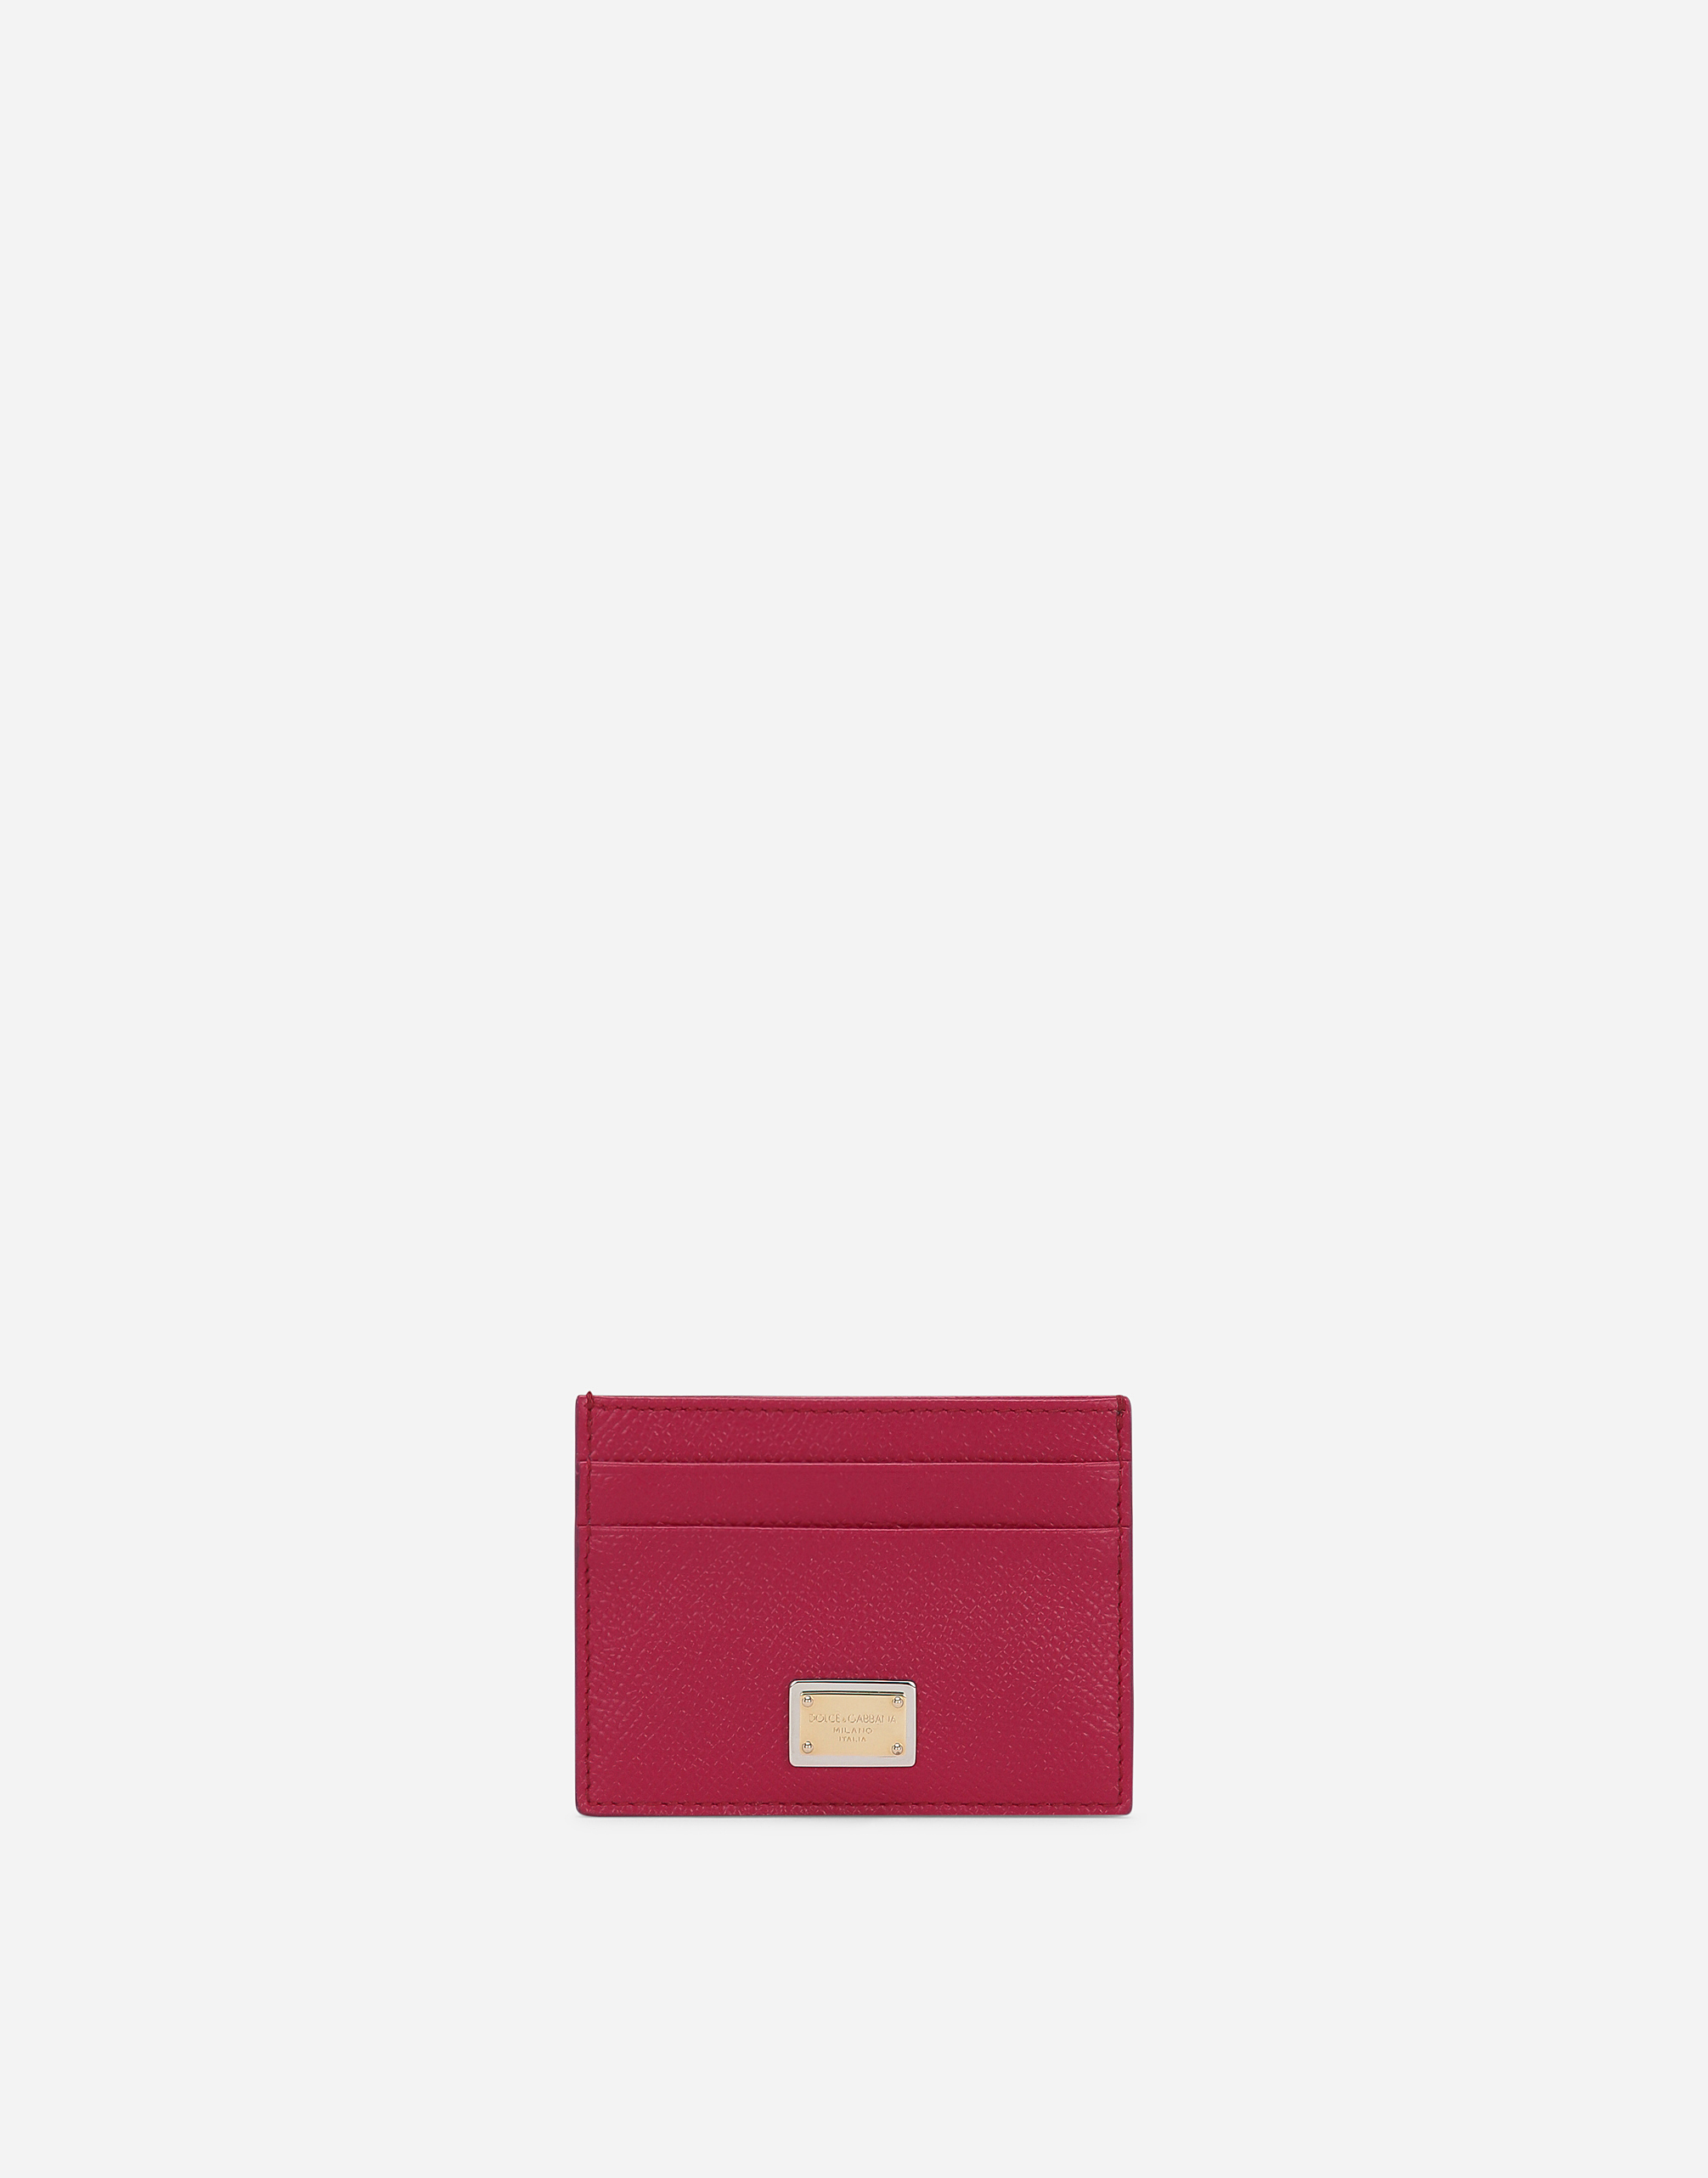 Dauphine calfskin card holder with branded tag in Fuchsia